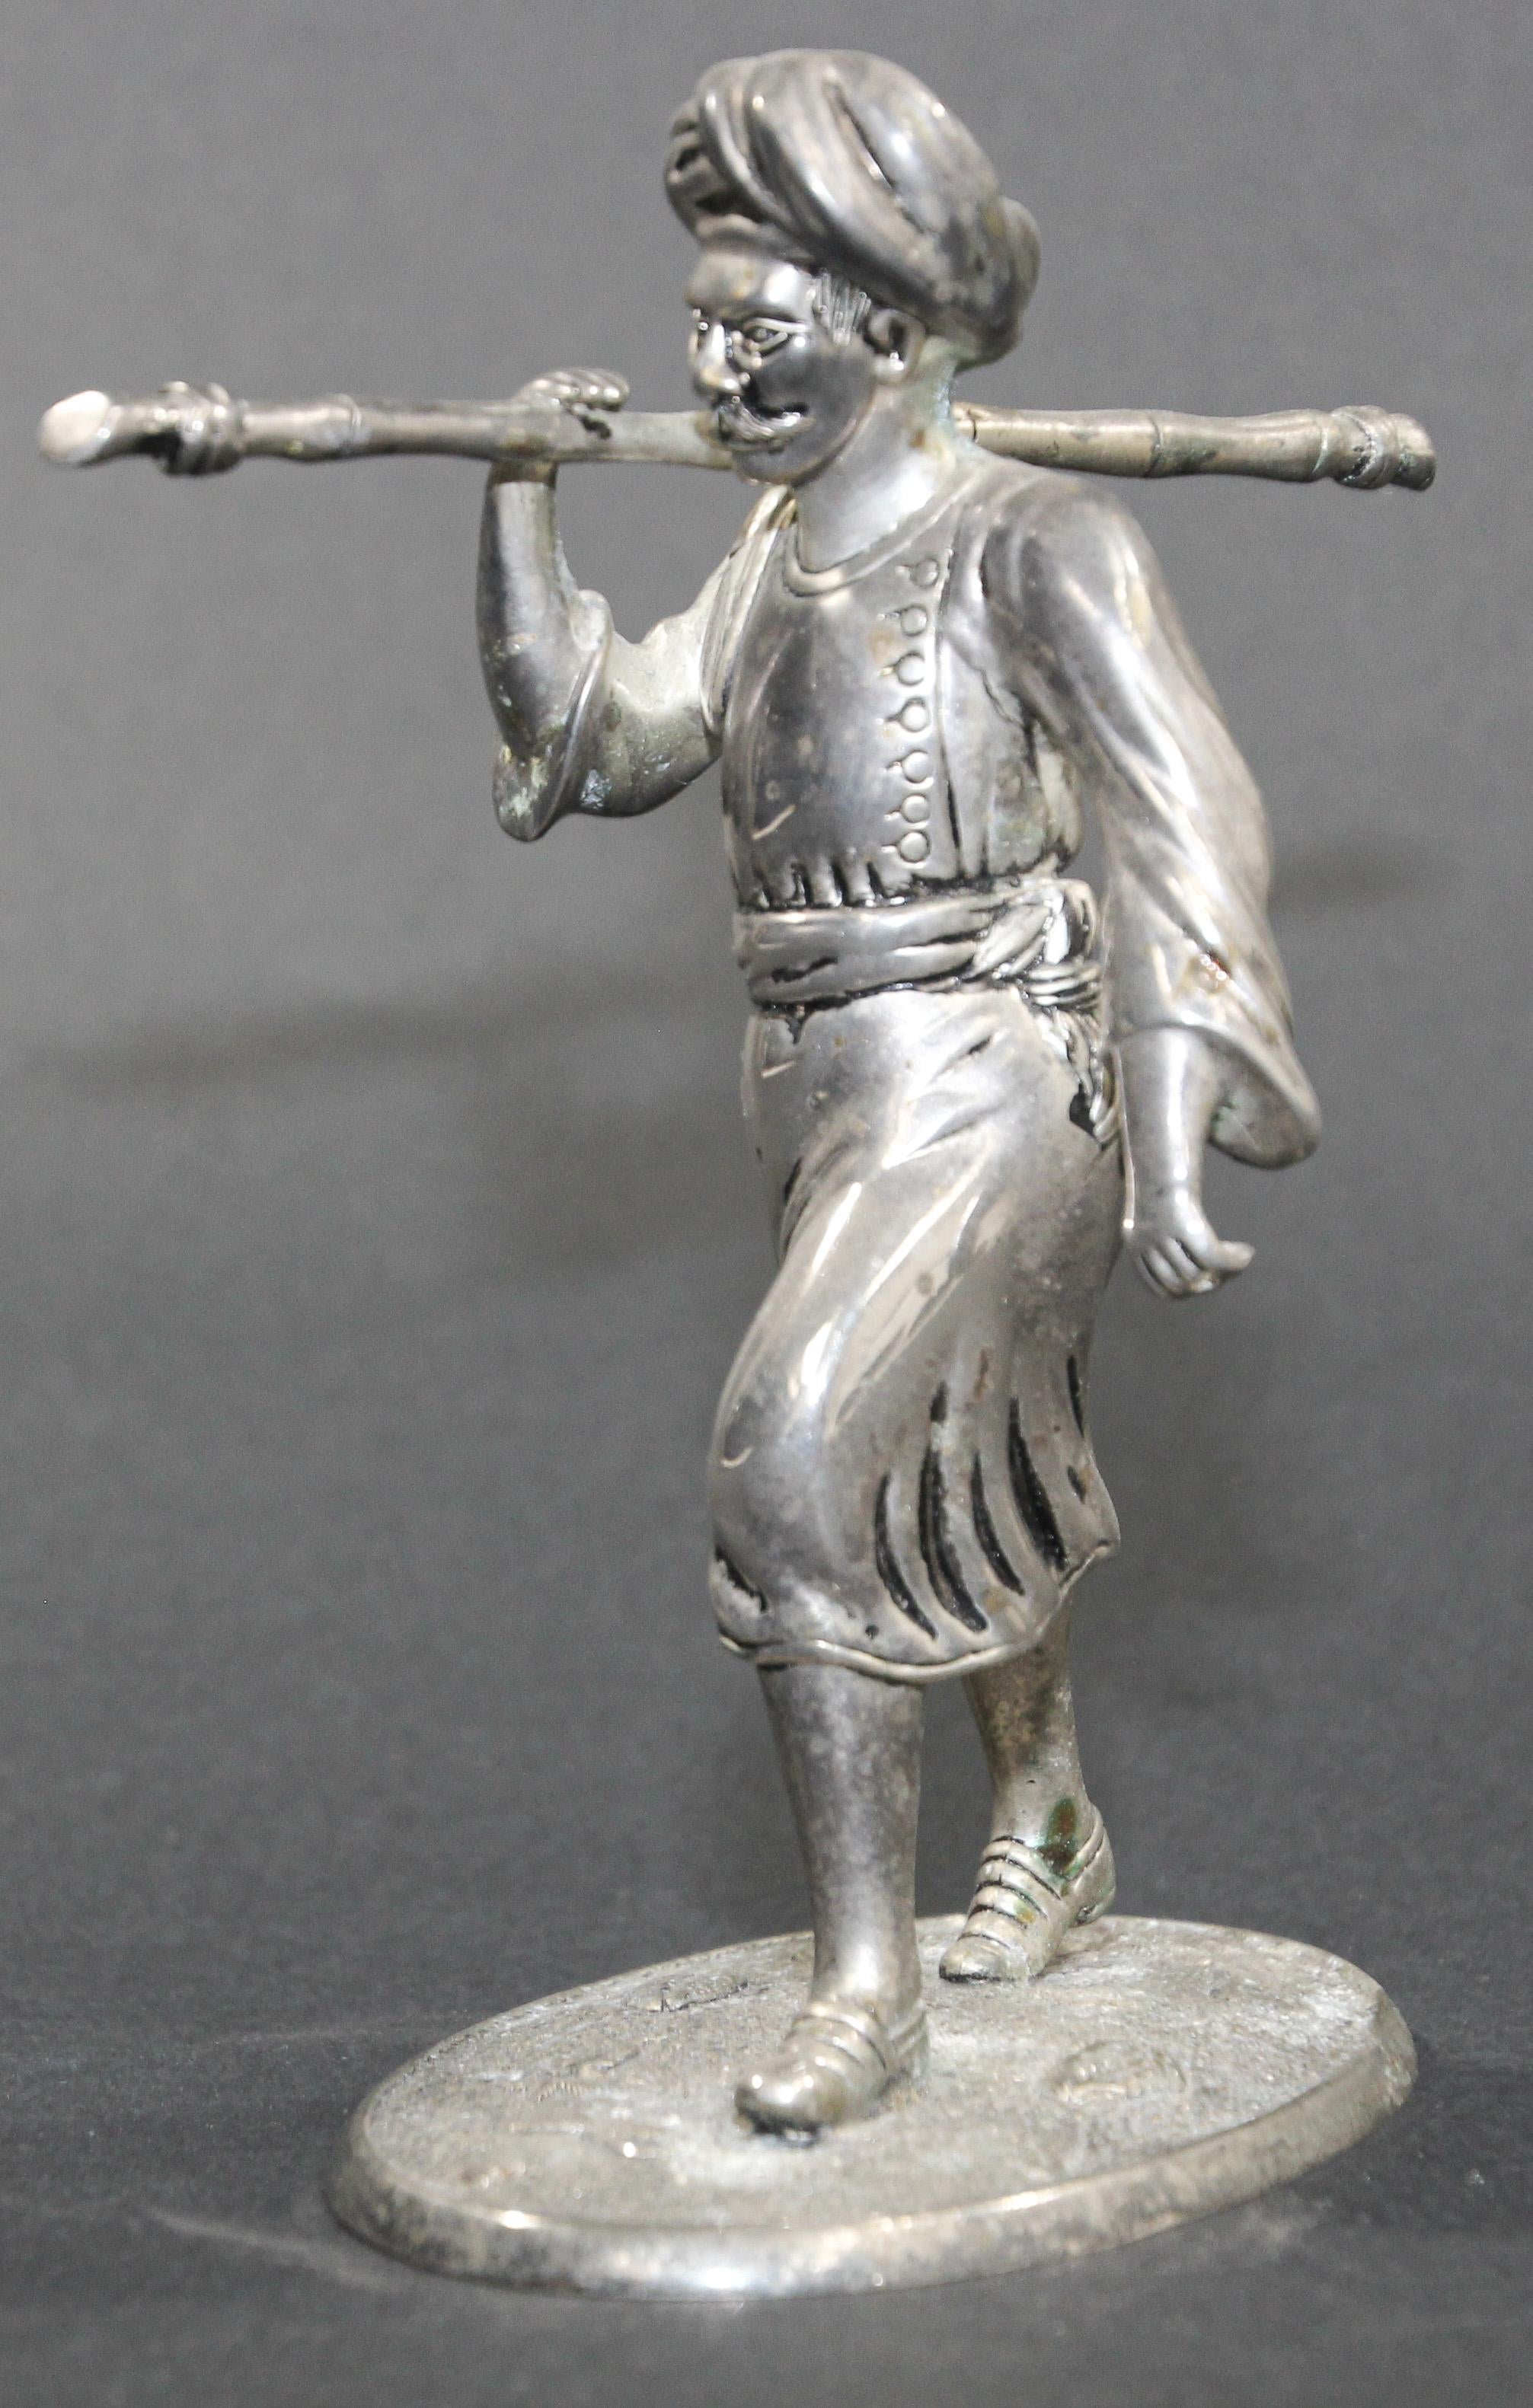 Silver plated sculpture of an Asian Indian farmer peasant man walking holding a long cane.
Sculpture of an old Indian farmer wearing traditional clothes and a turban.
     